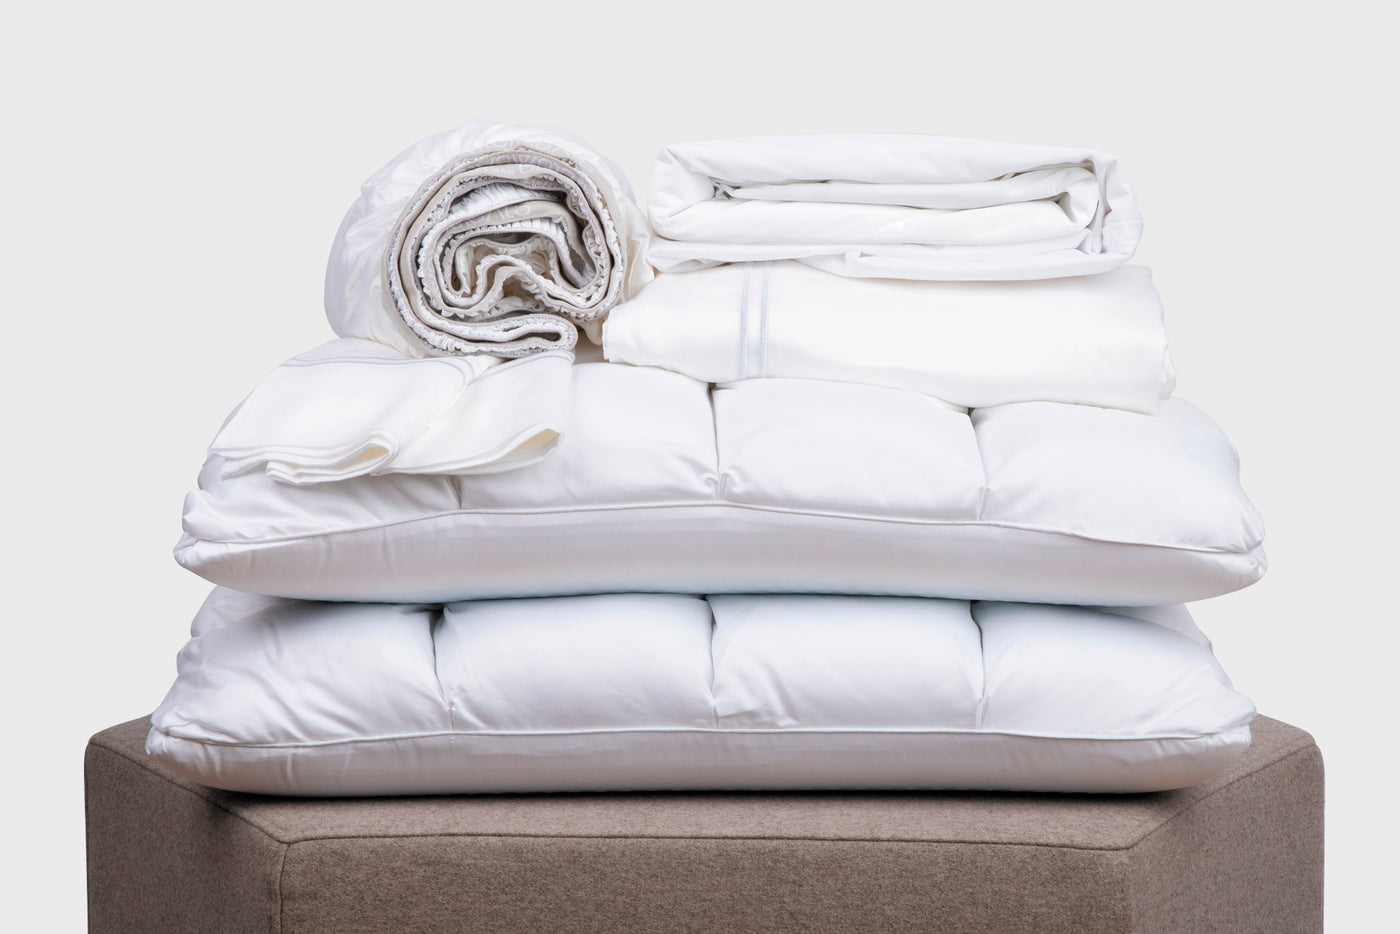 Image of a pile of all-white bedding on a taupe colored stool. The bedding includes (from top to bottom): a rolled white Refreshing TENCEL™ Lyocell fitted sheet, two white Refreshing TENCEL™ Lyocell Pillowcases, a neatly folded Cooling Mattress Protector, a neatly folded Refreshing TENCEL™ Lyocell flat sheet, and two SoftCell® Chill Pillows